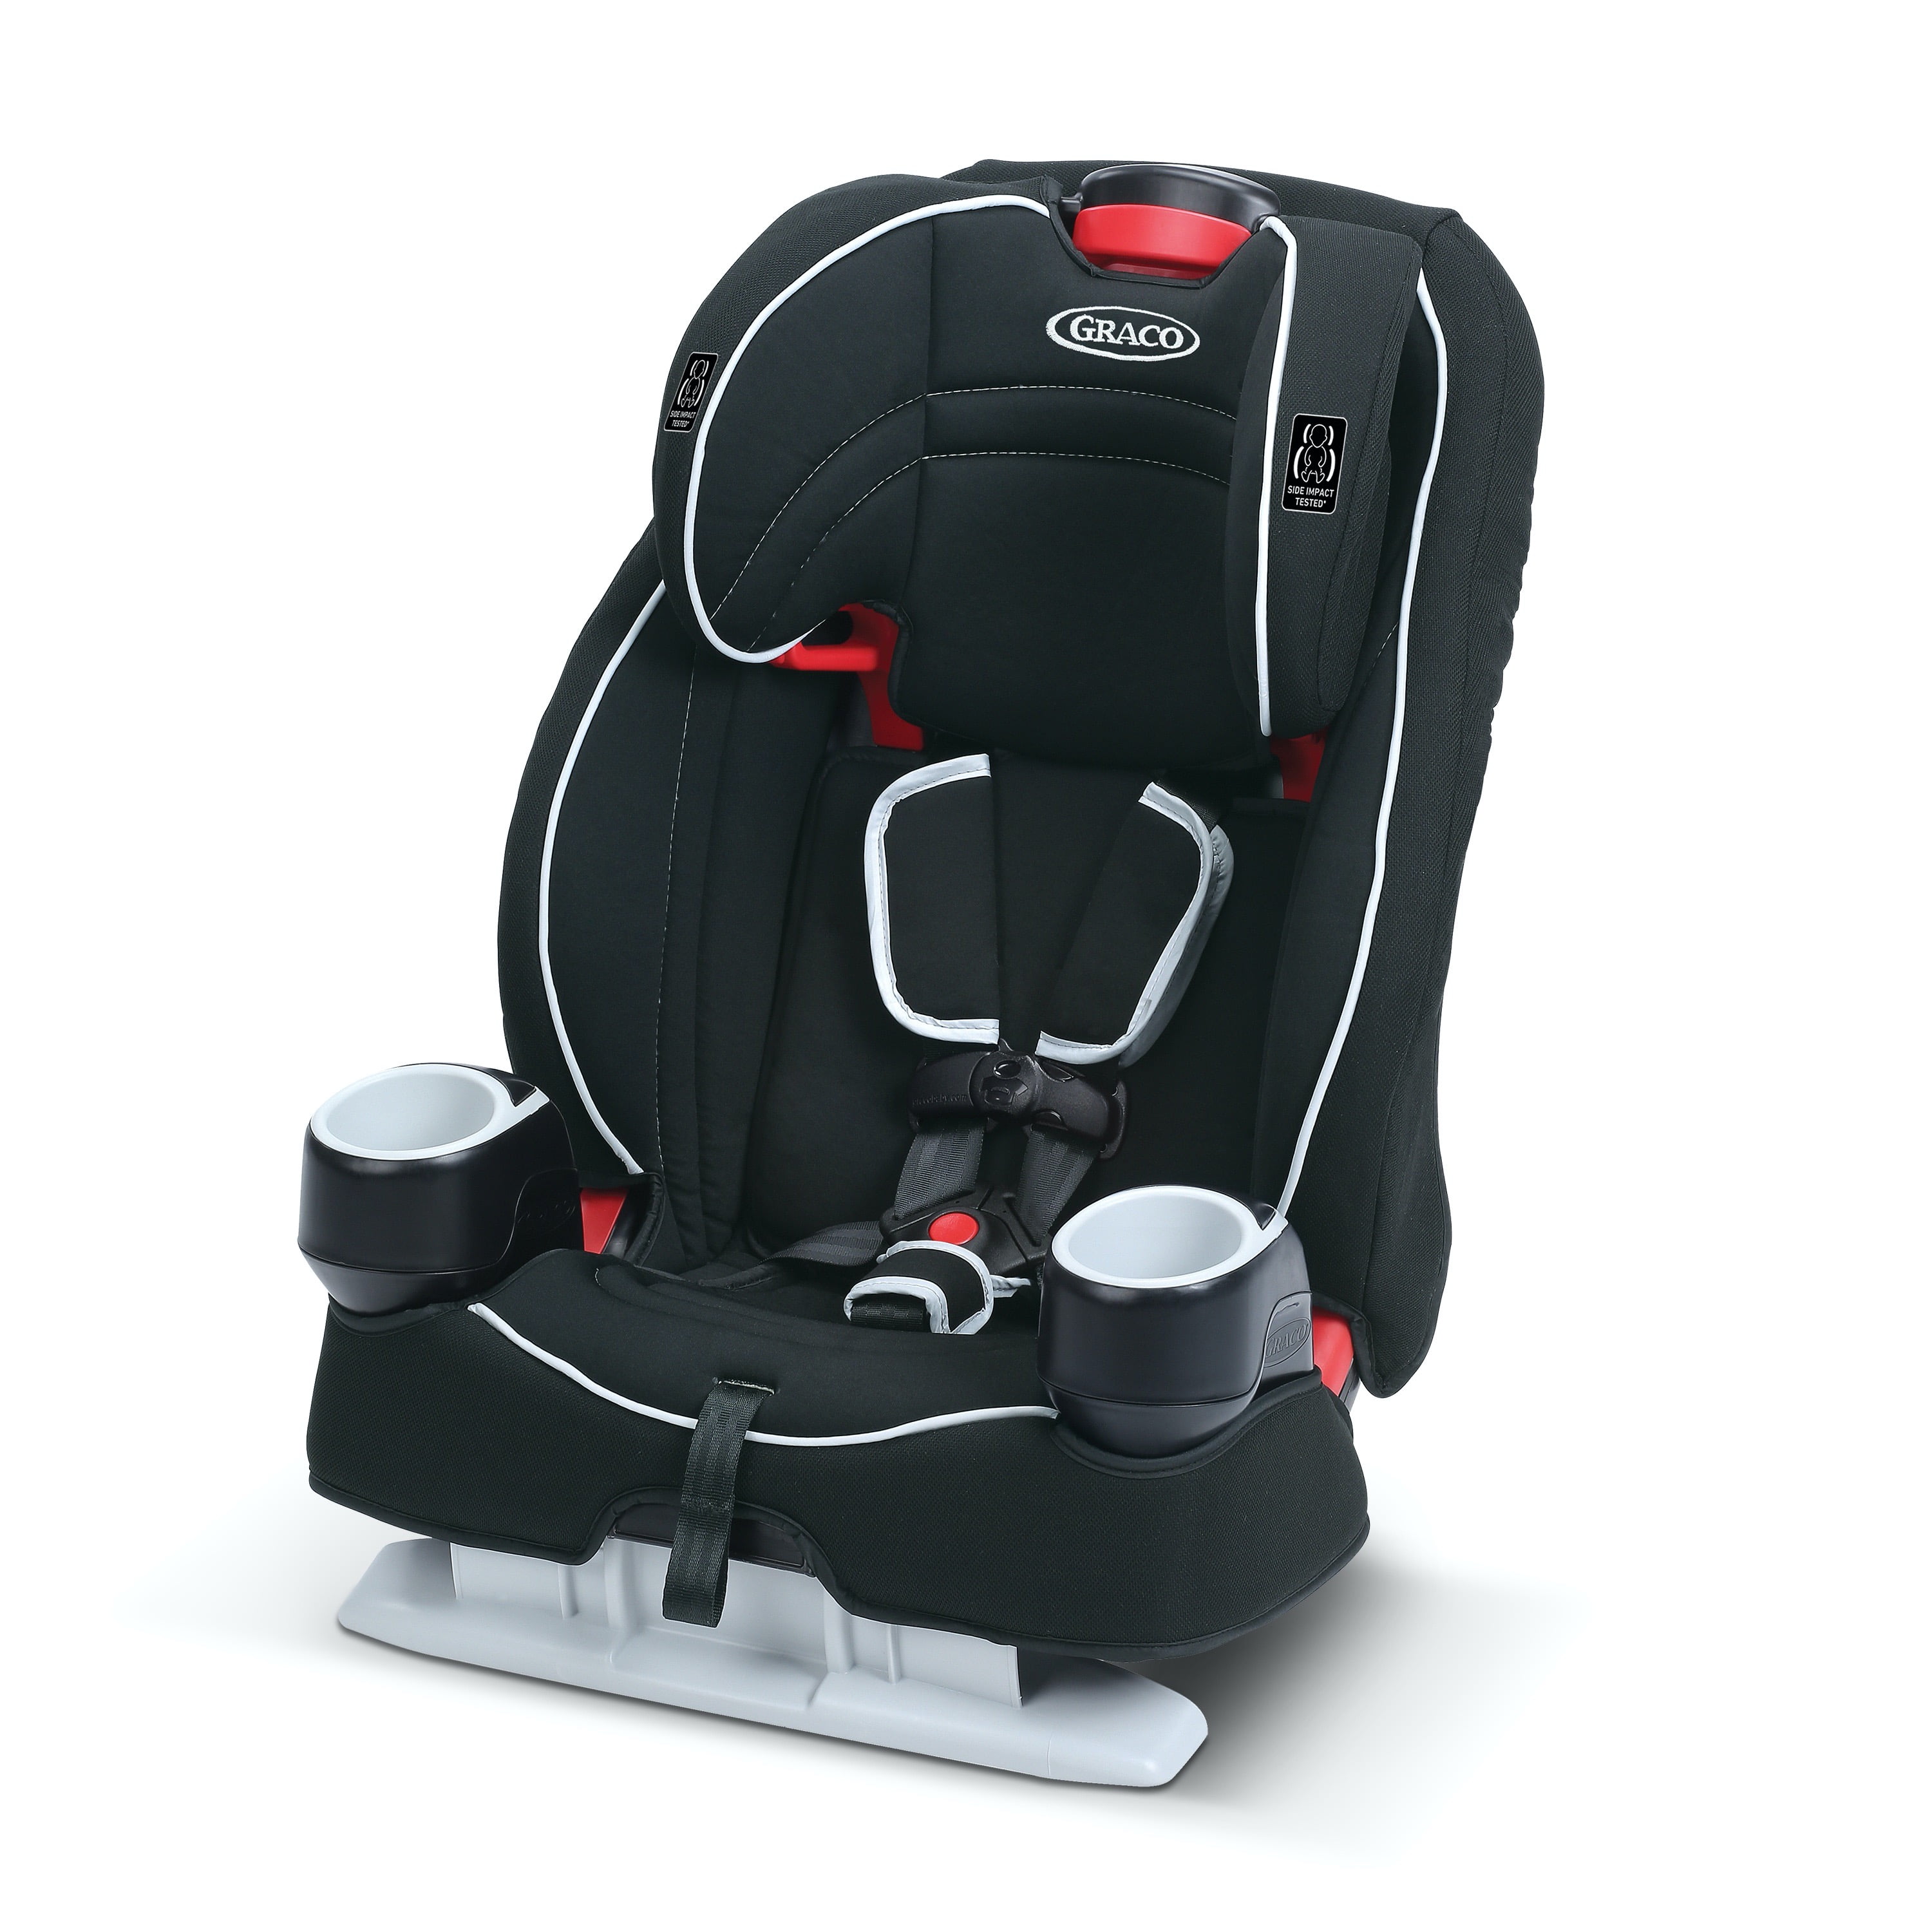 Graco Graco child car booster seat 